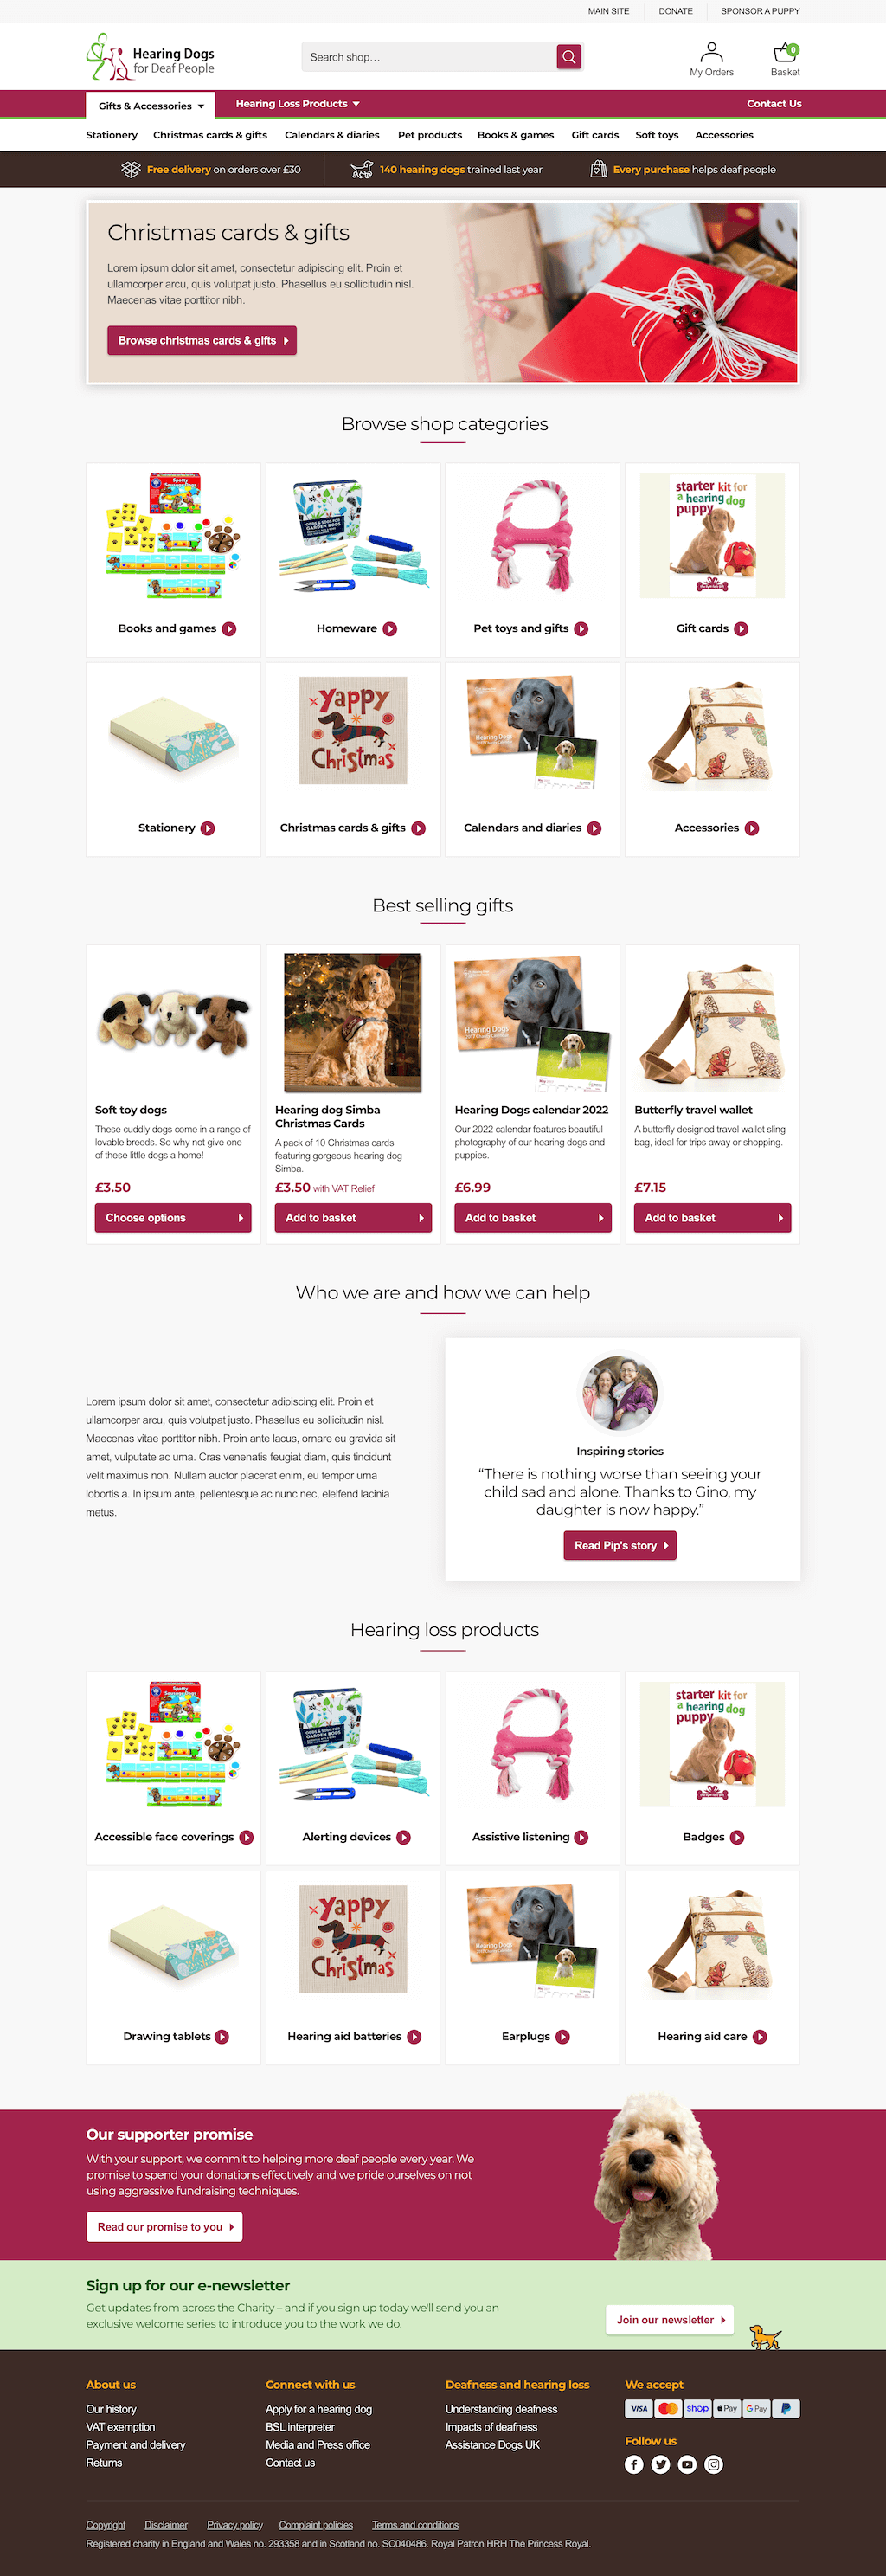 Designs for the Hearing Dogs for Deaf People website.